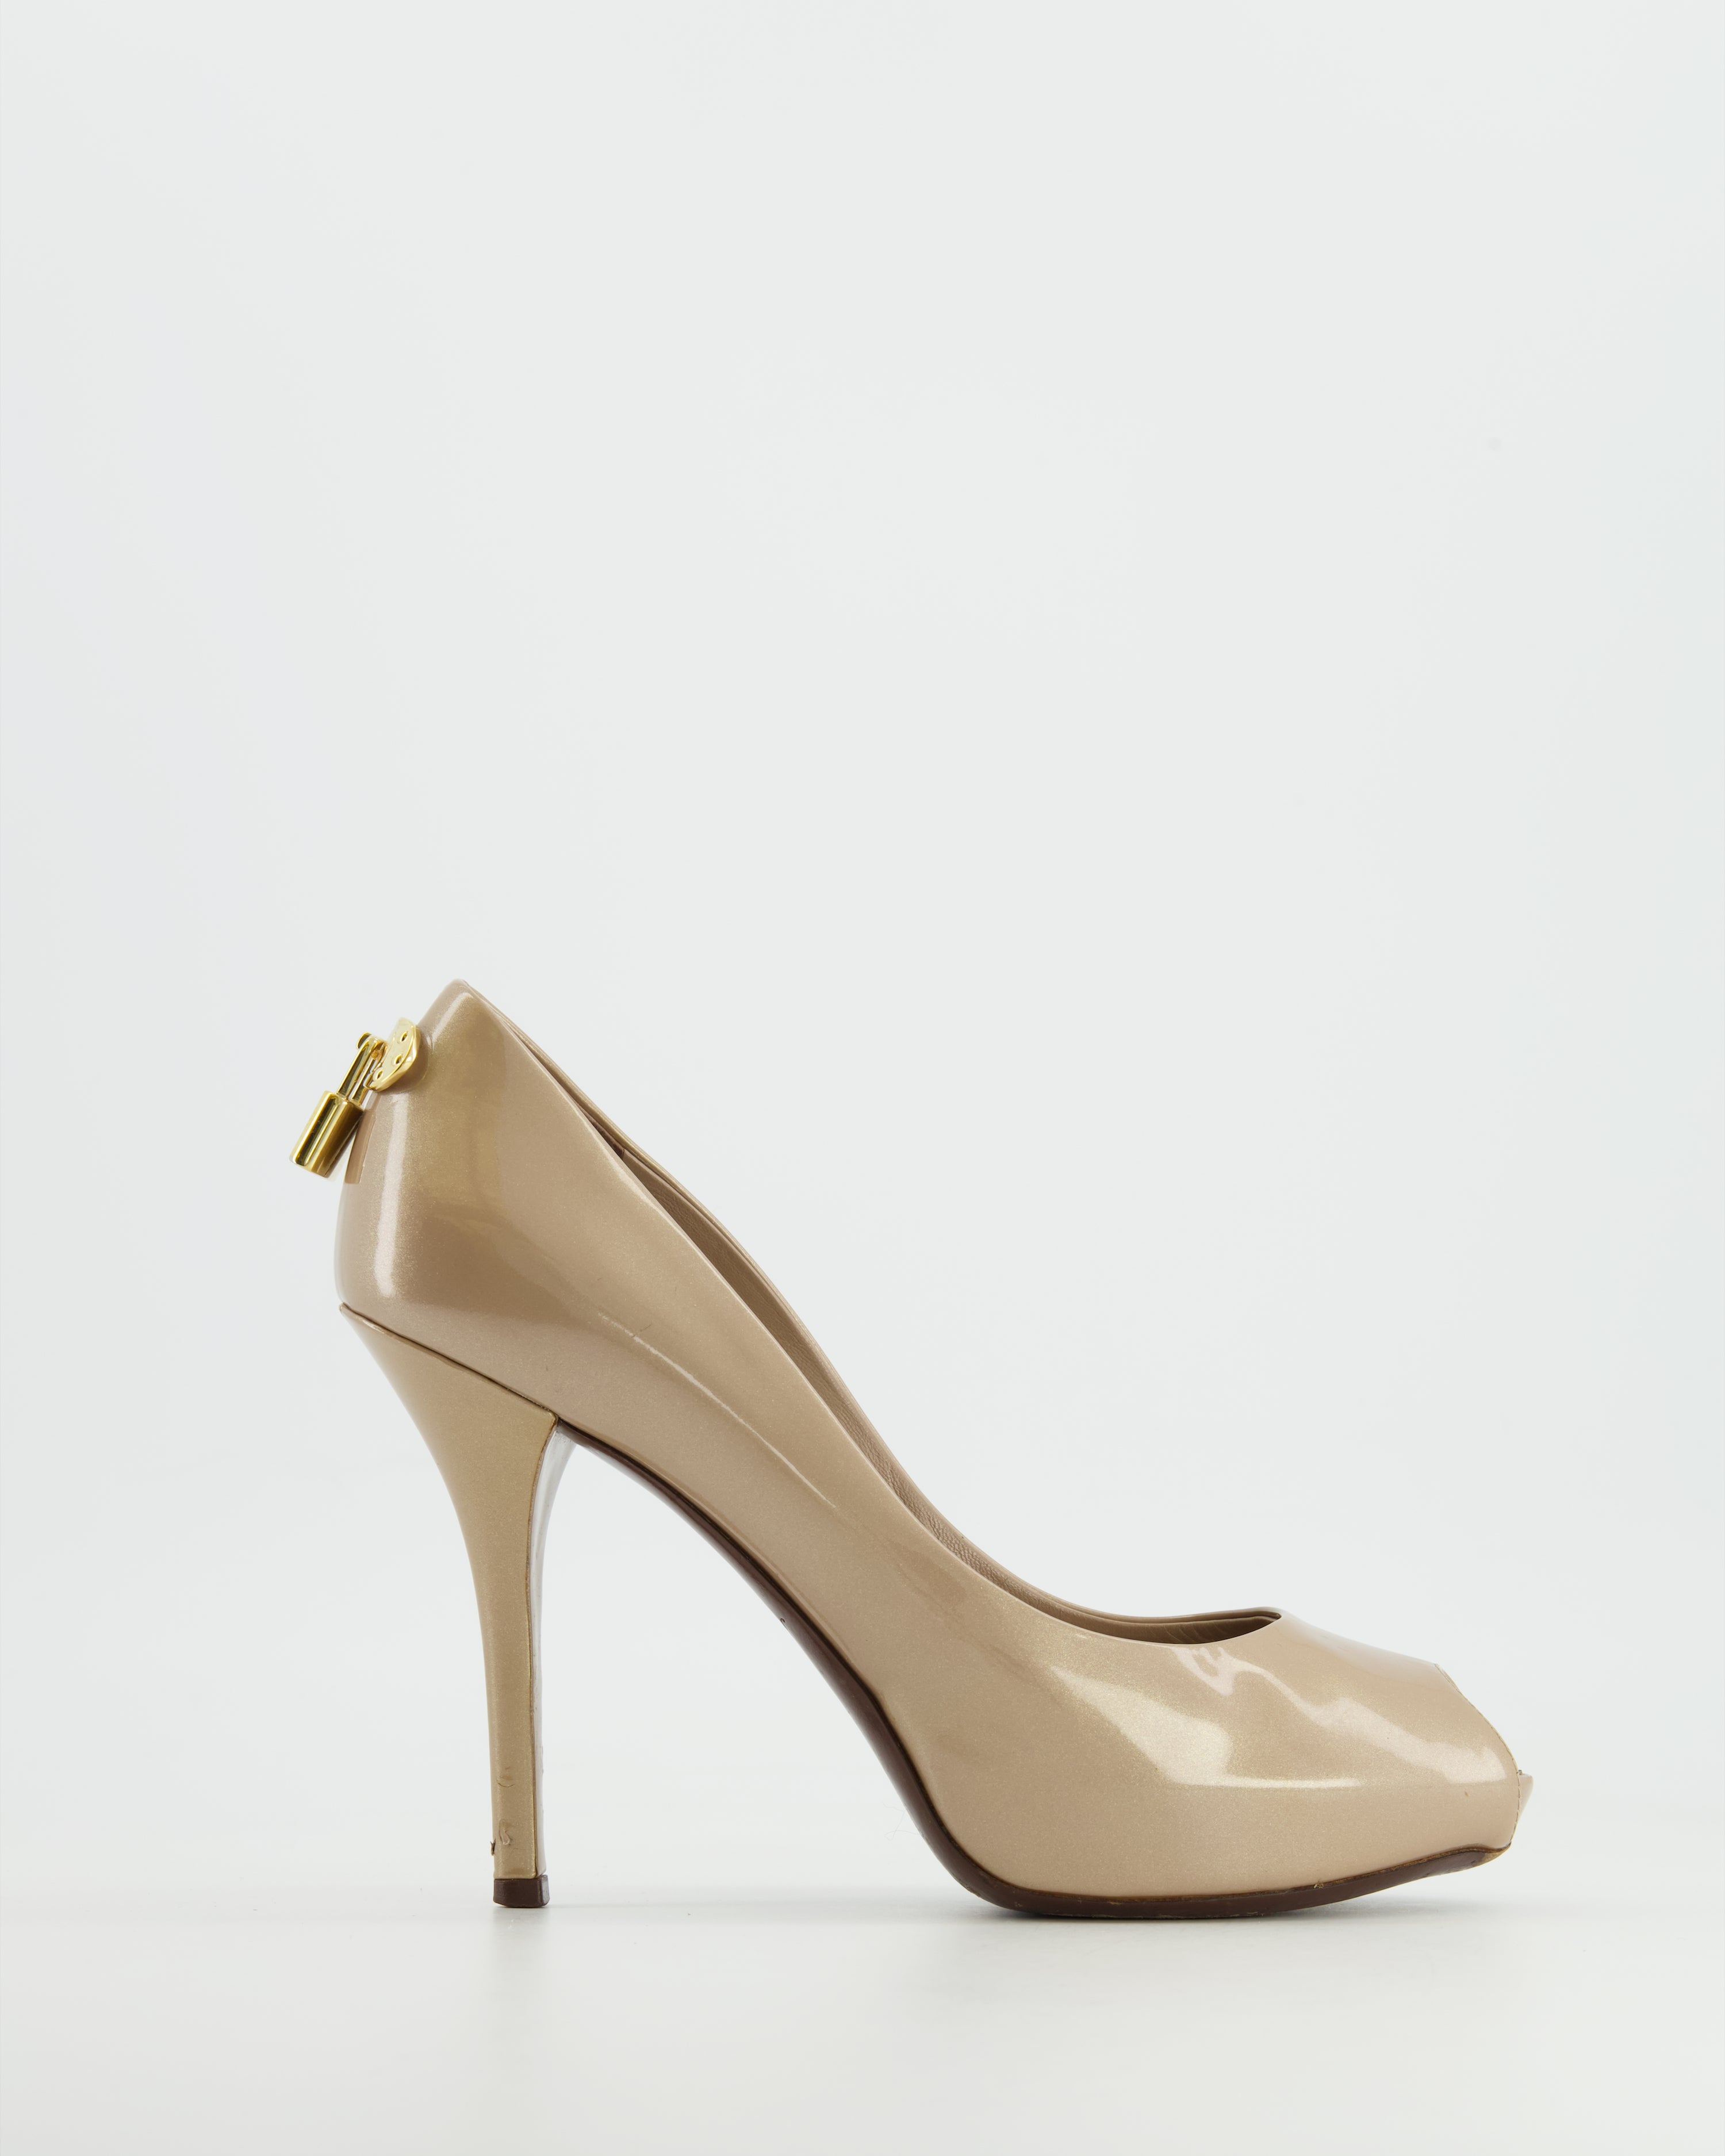 Leather heels Louis Vuitton Gold size 38.5 EU in Leather - 31445499